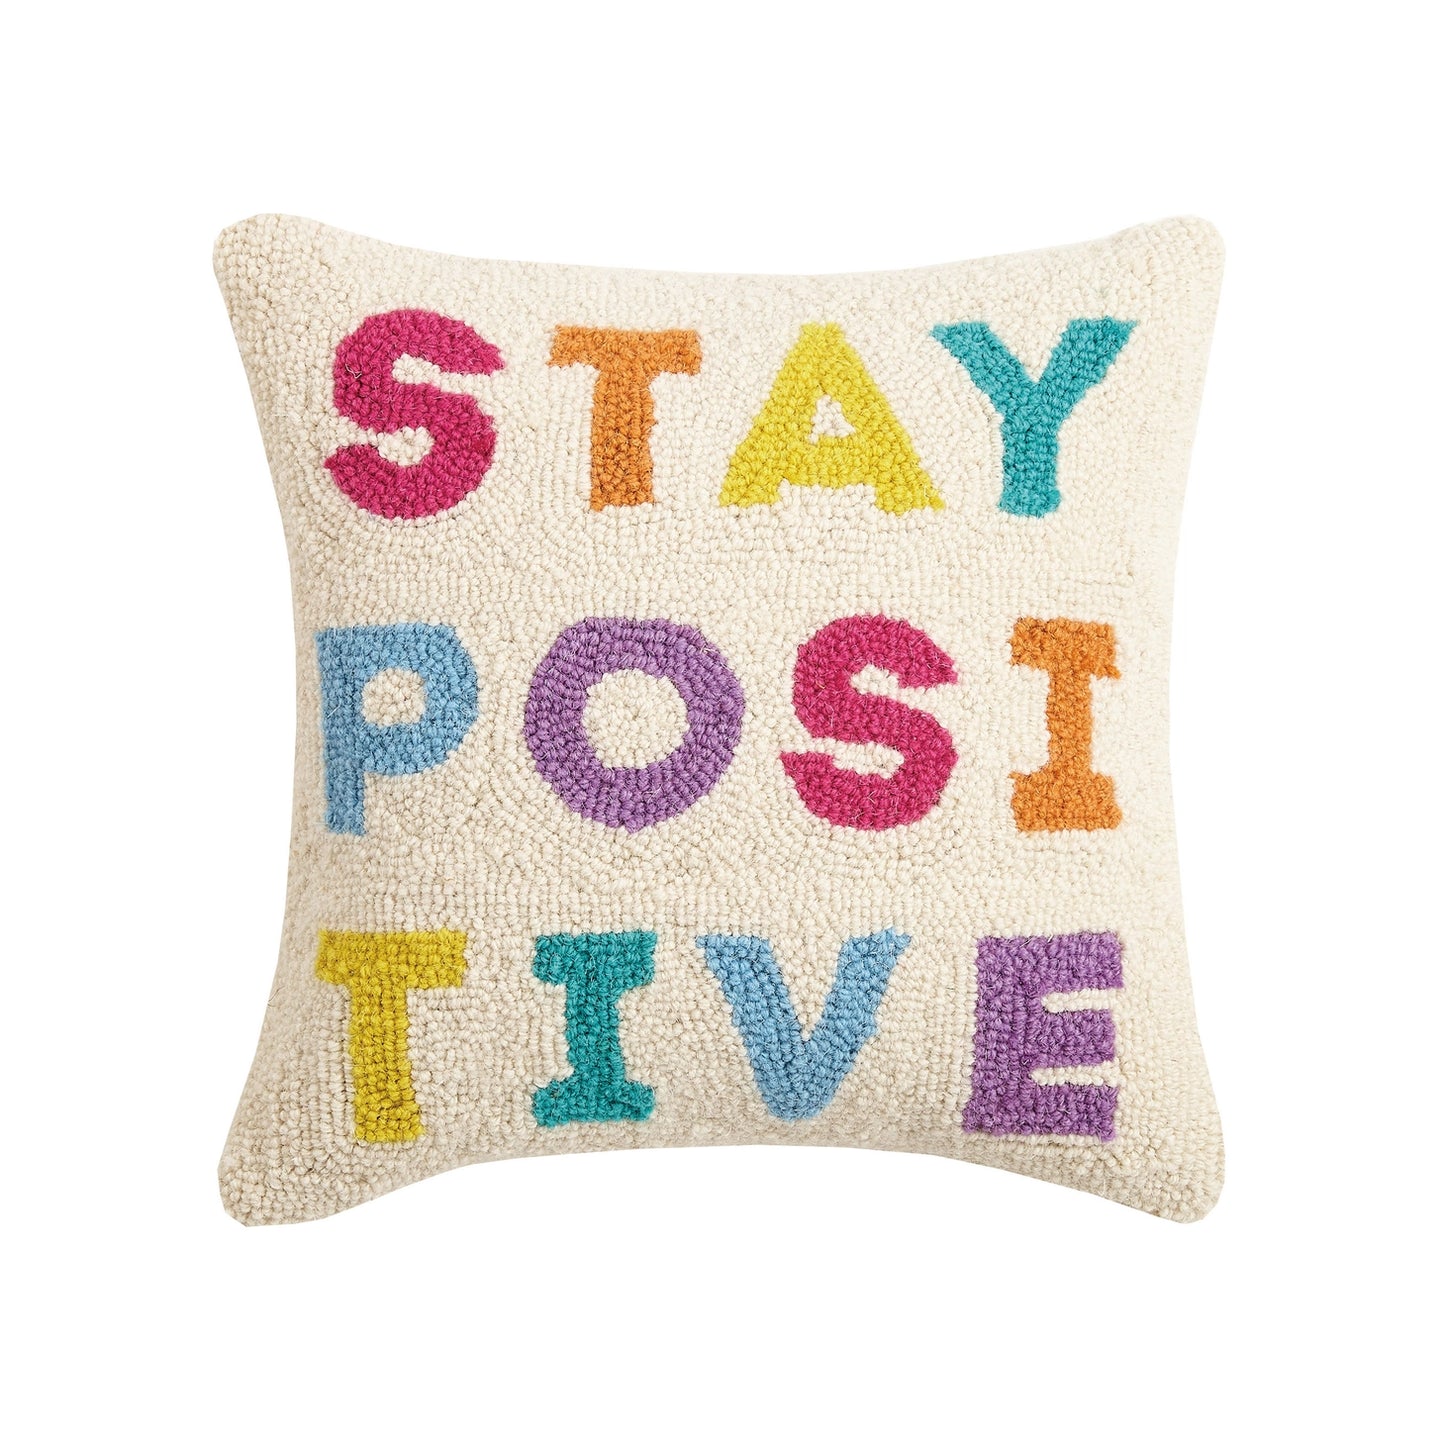 Stay Positive 14x14 accent pillow